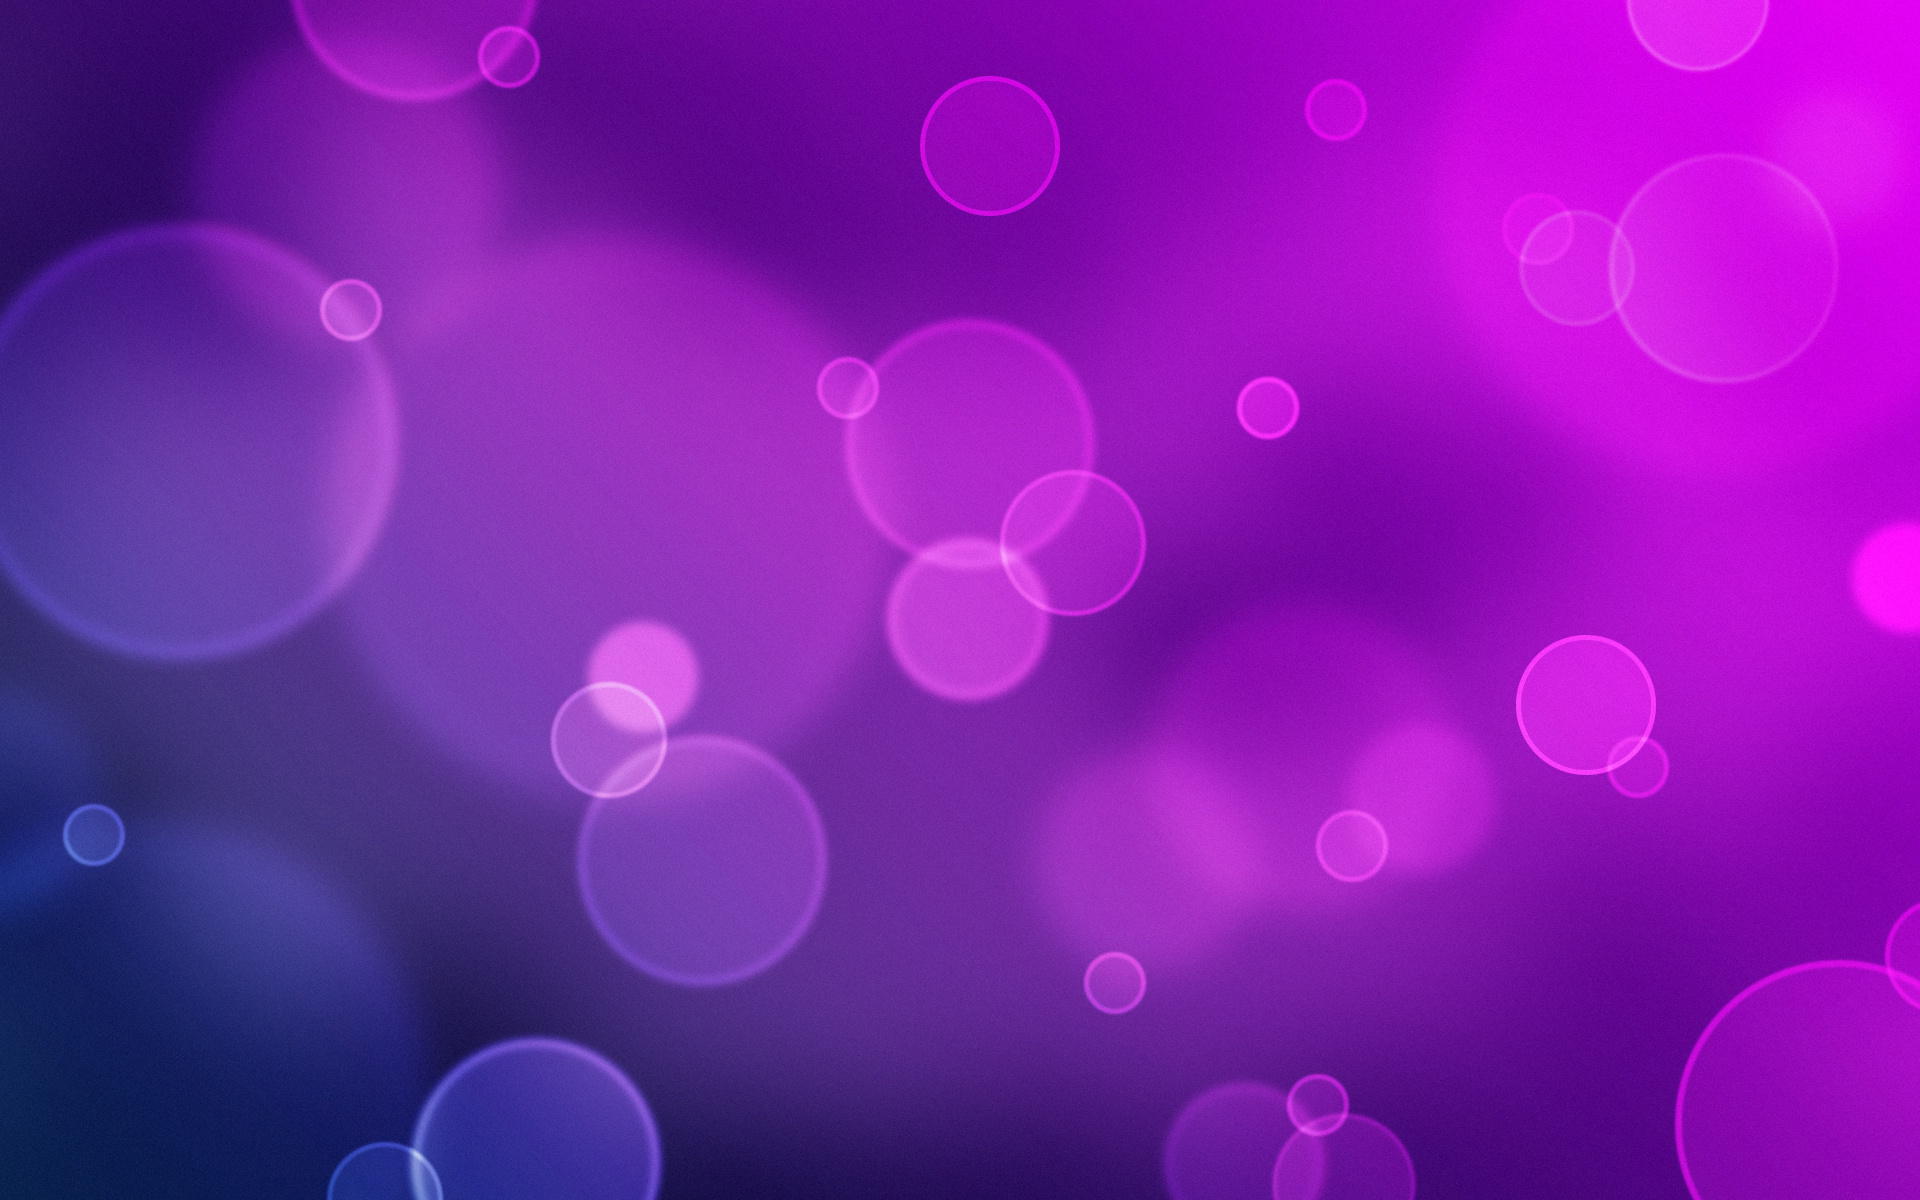 Home Pictures Background Purple Image